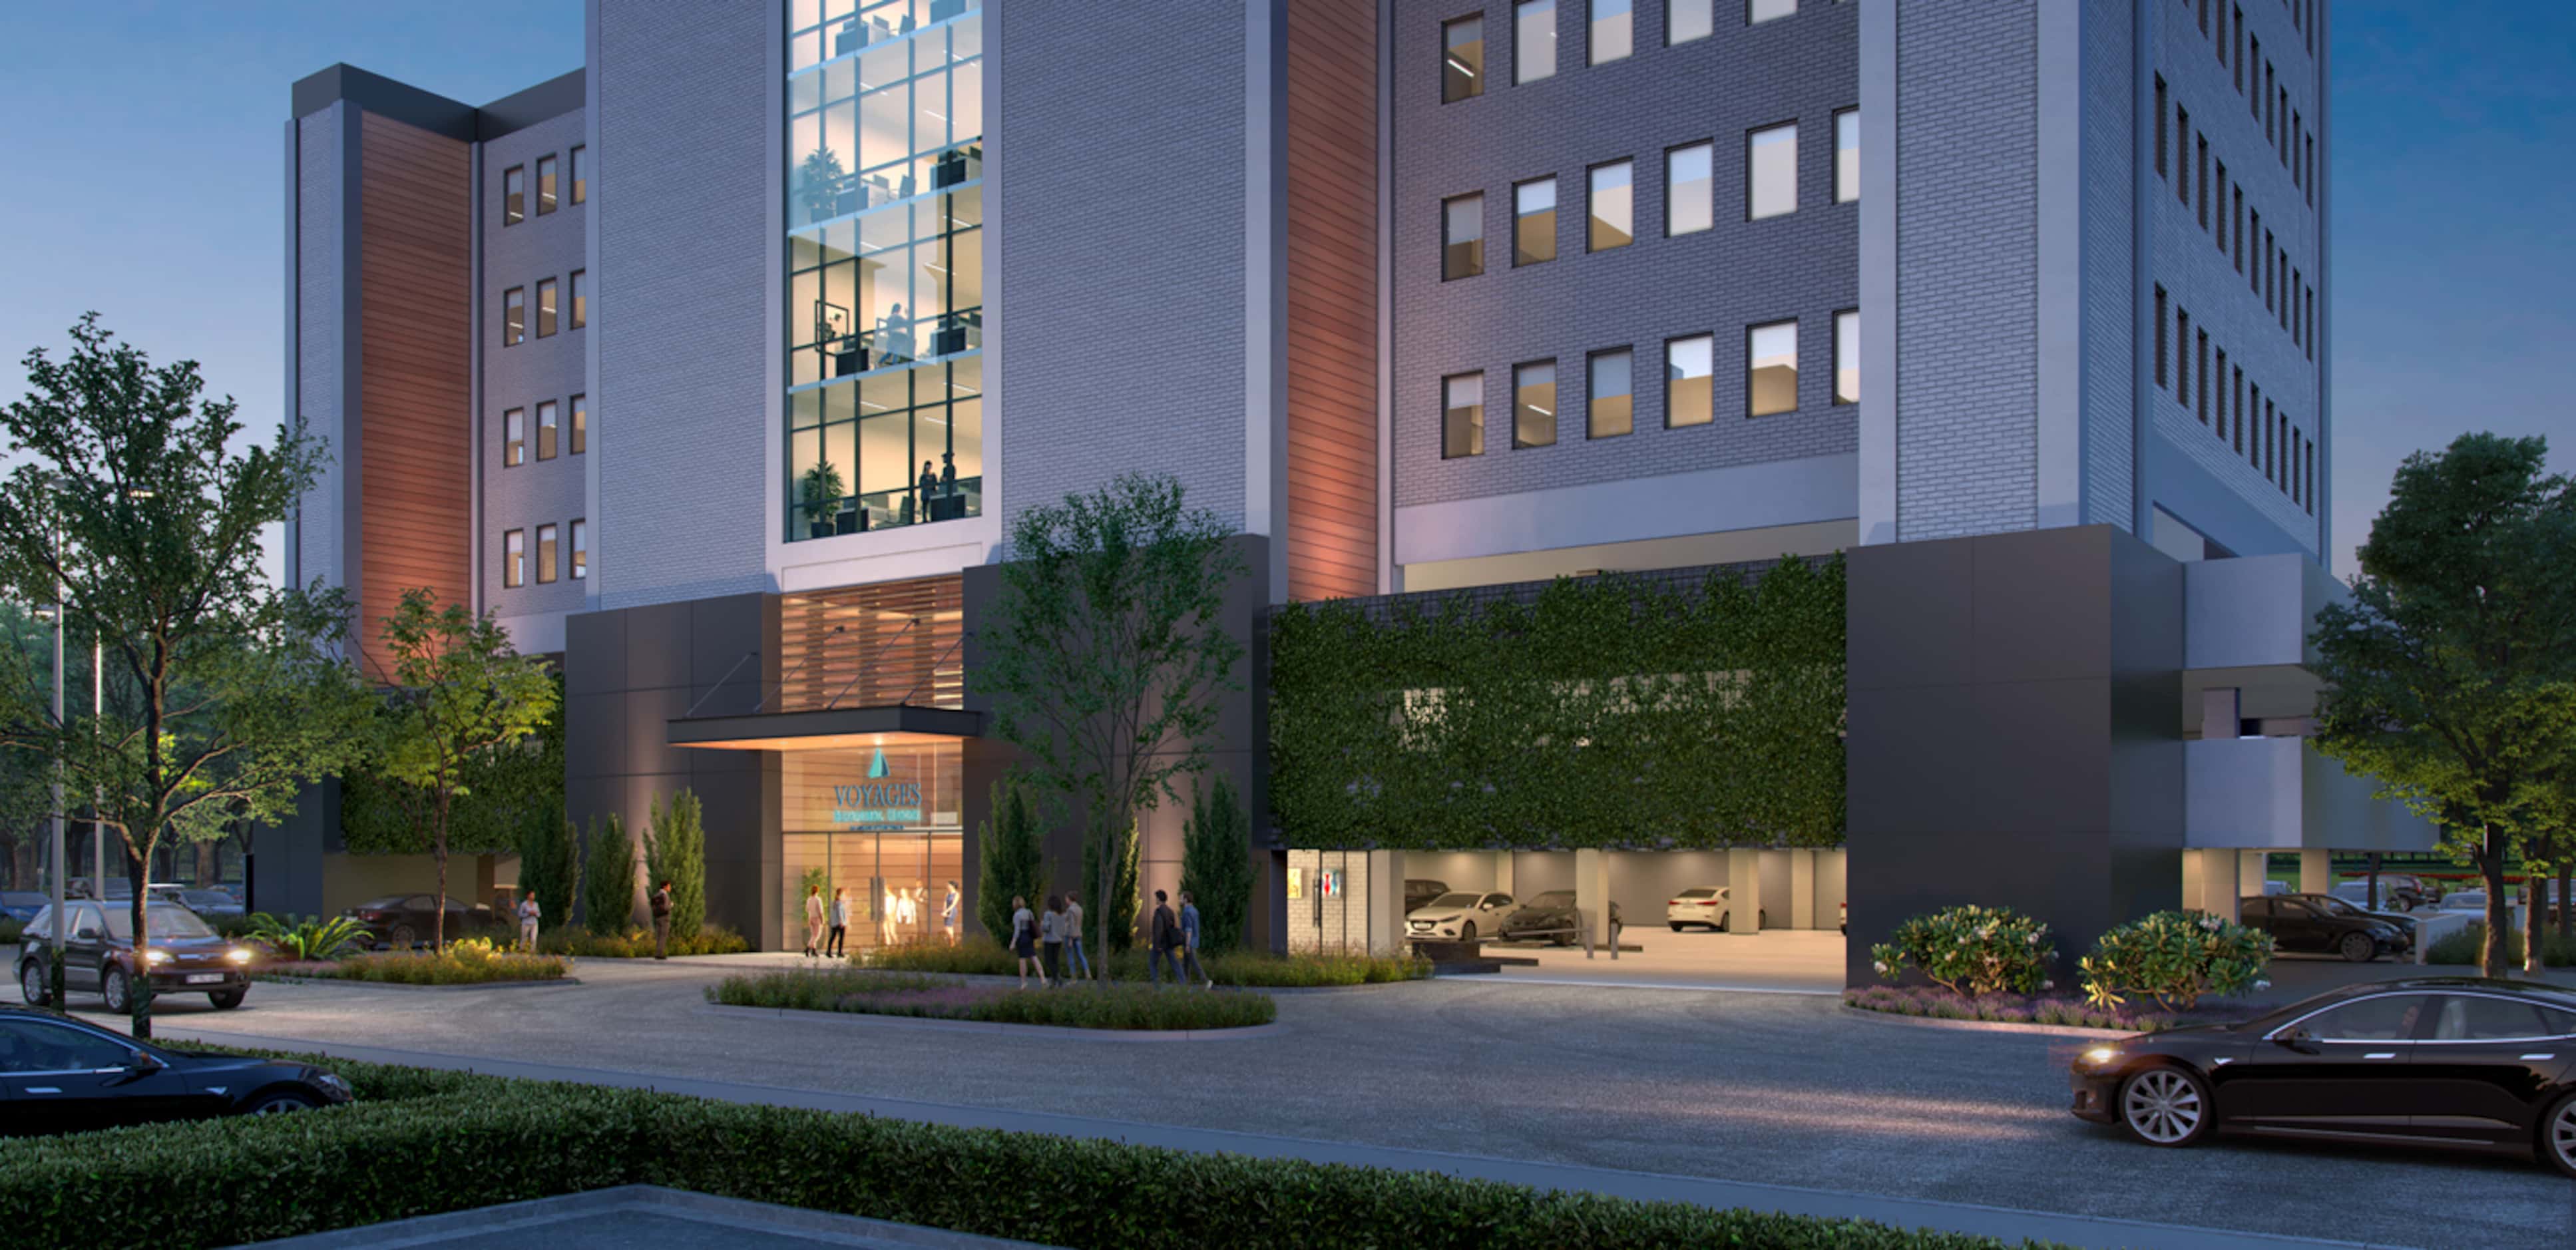 The forthcoming PAM Voyages Behavioral Health Hospital will bring 72 beds in the post-acute...